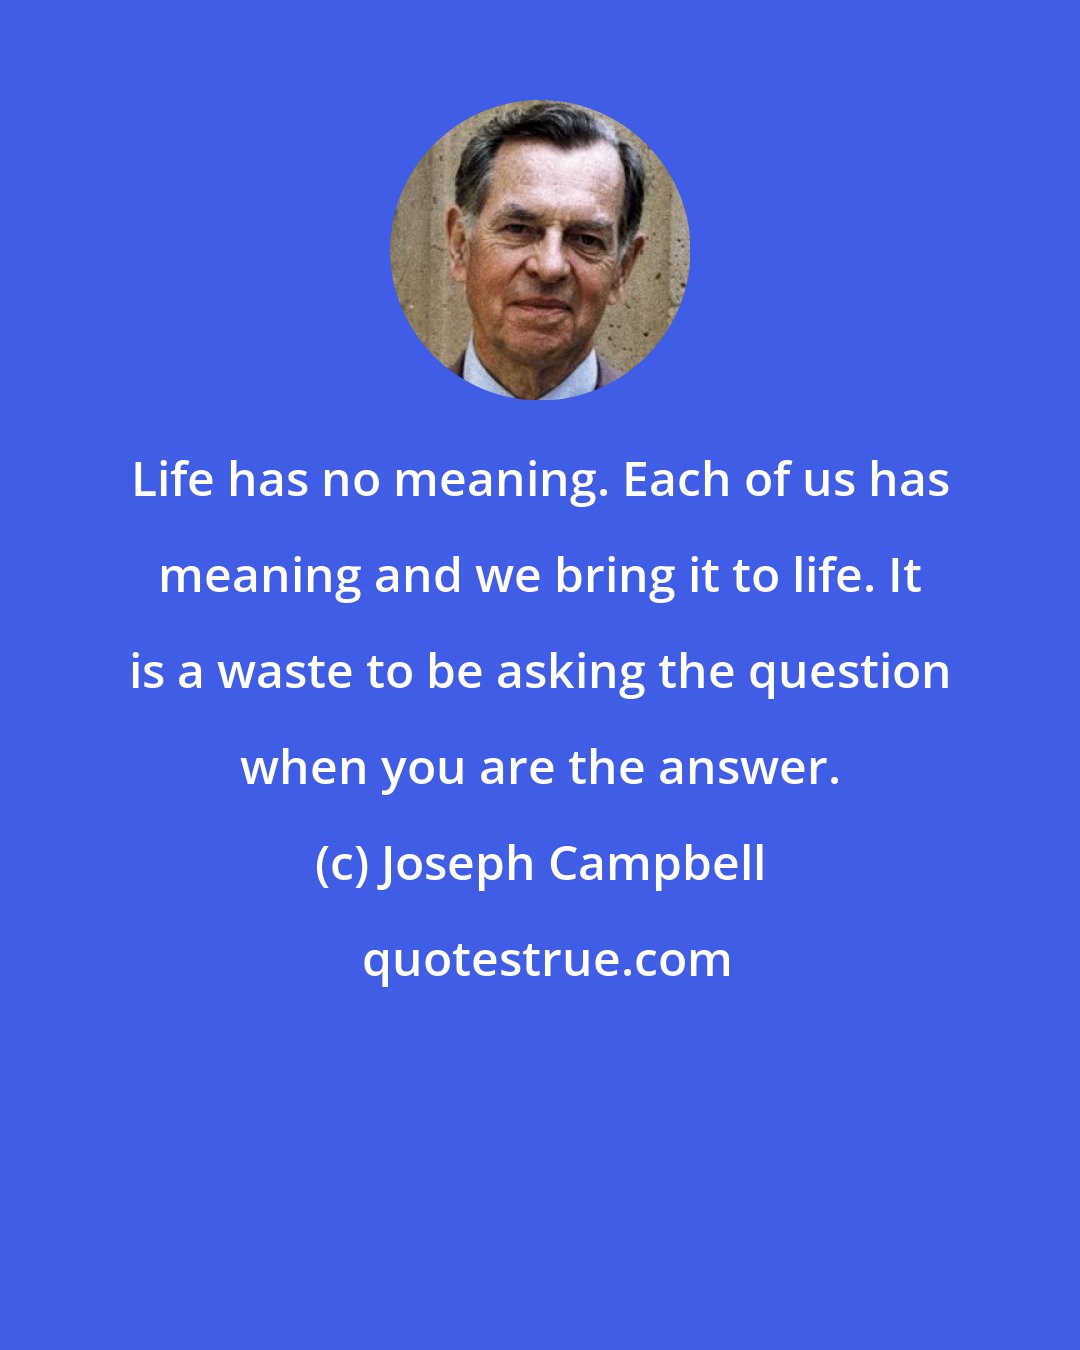 Joseph Campbell: Life has no meaning. Each of us has meaning and we bring it to life. It is a waste to be asking the question when you are the answer.